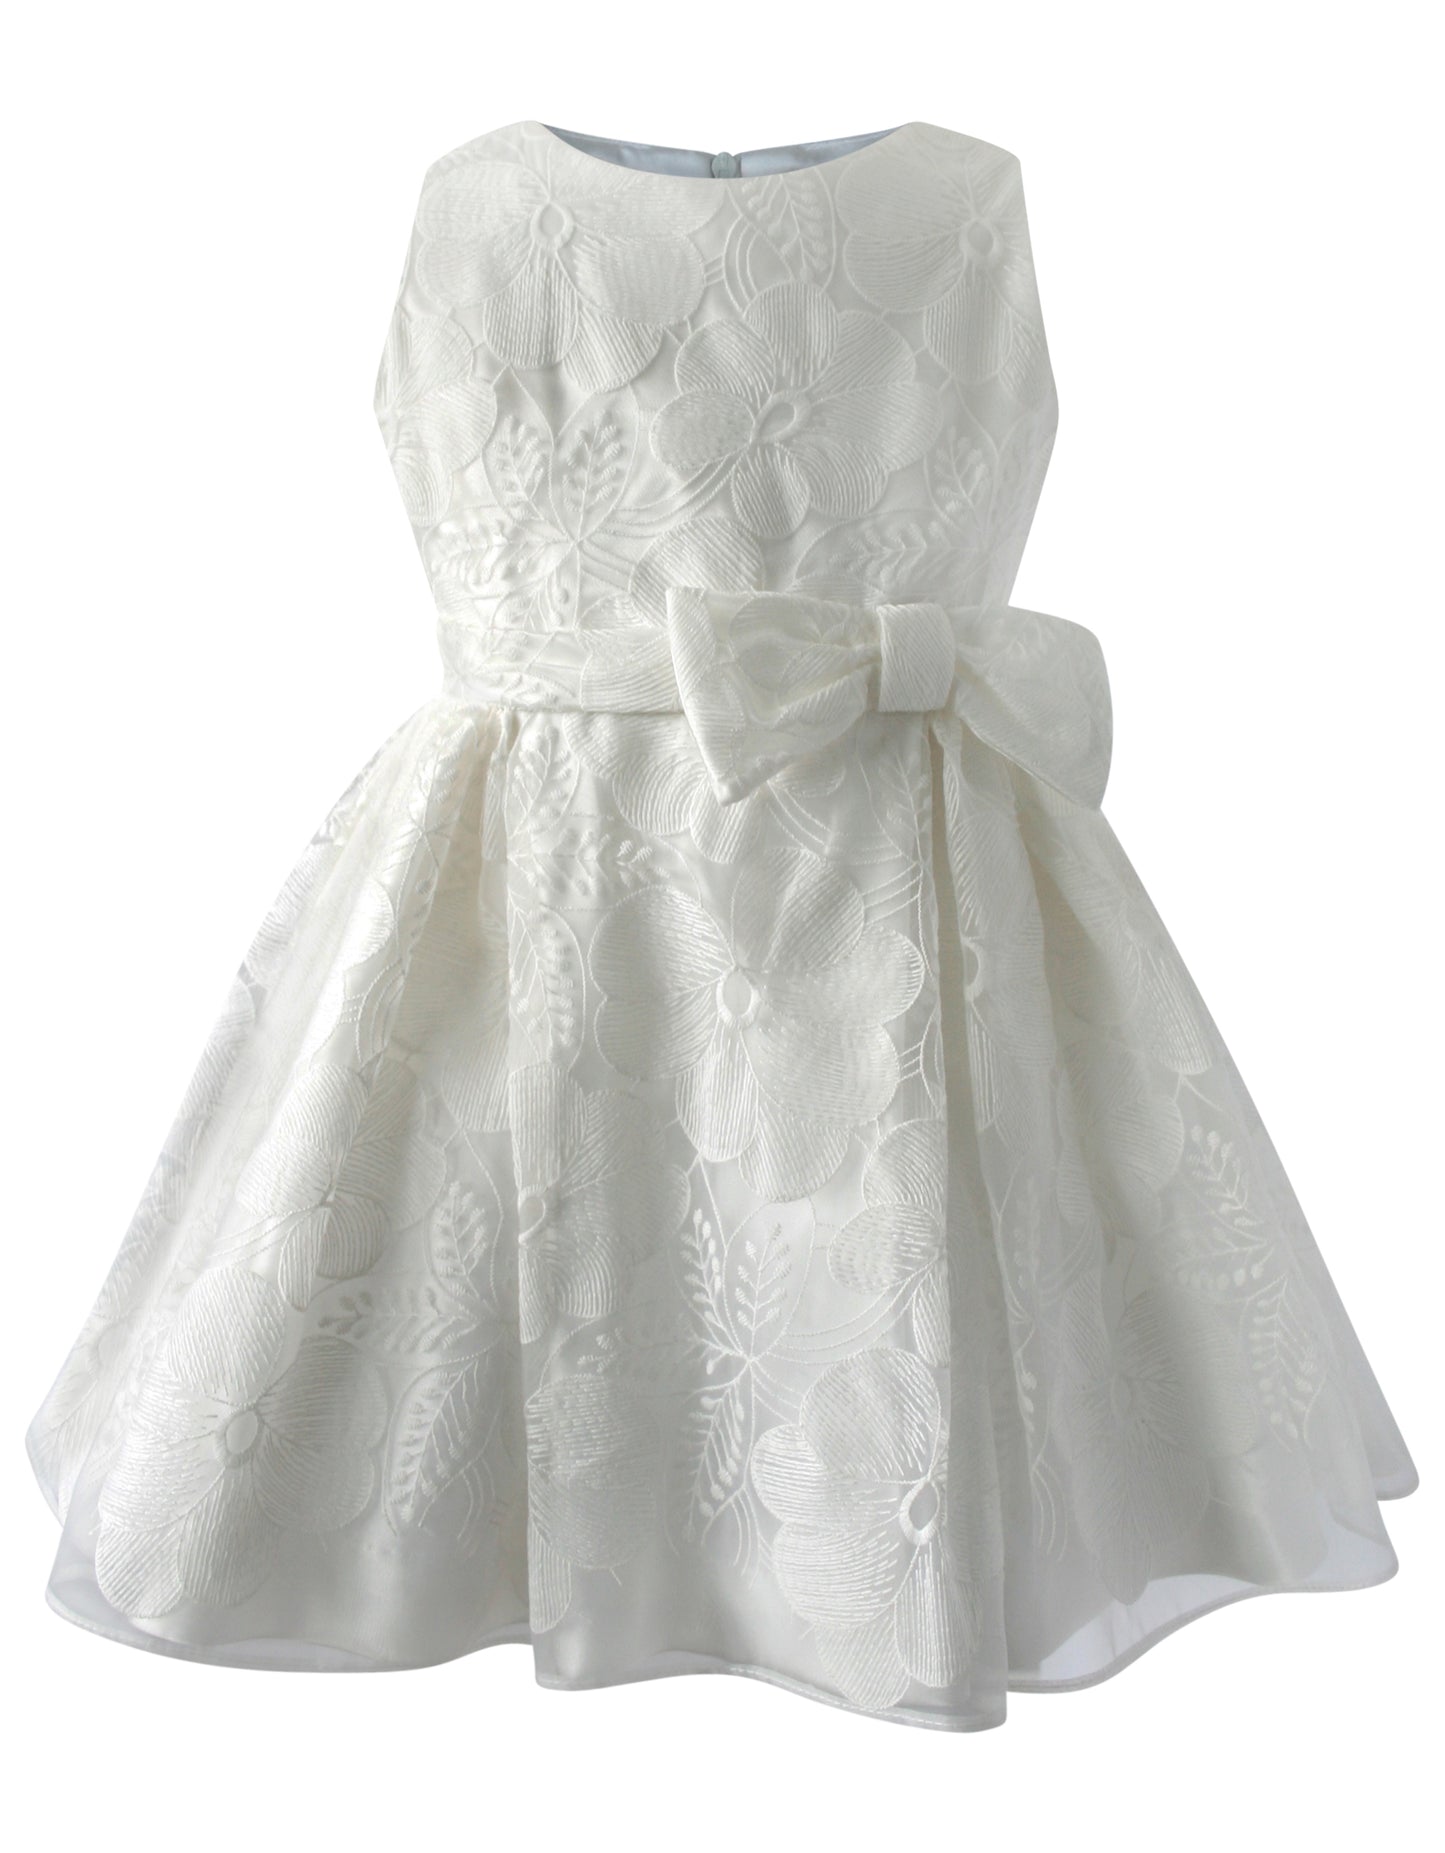 Helena and Harry Girl's White Side Bow Dress